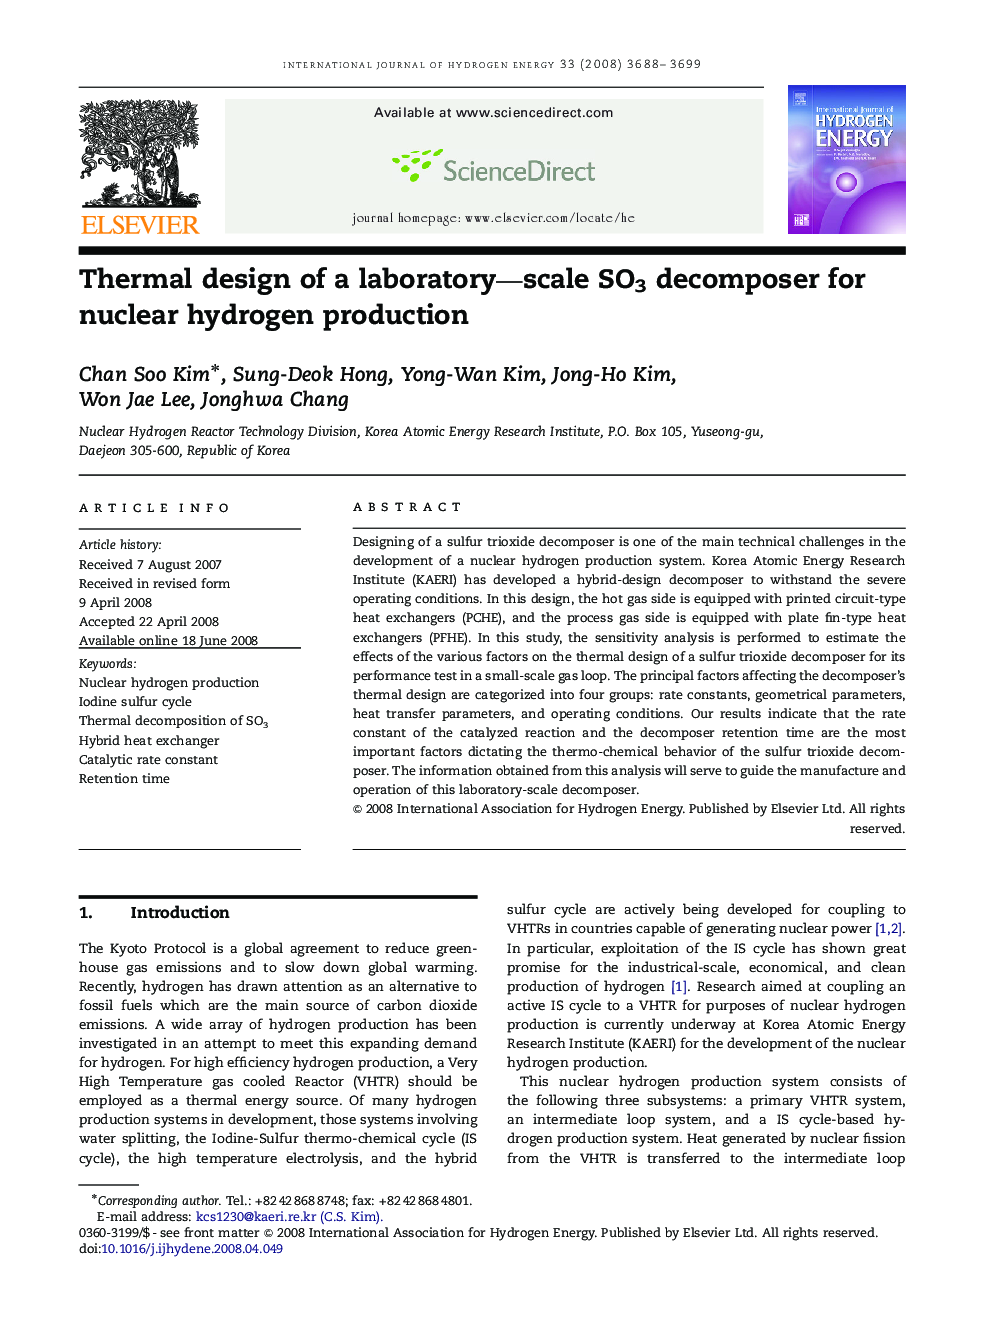 Thermal design of a laboratory—scale SO3 decomposer for nuclear hydrogen production